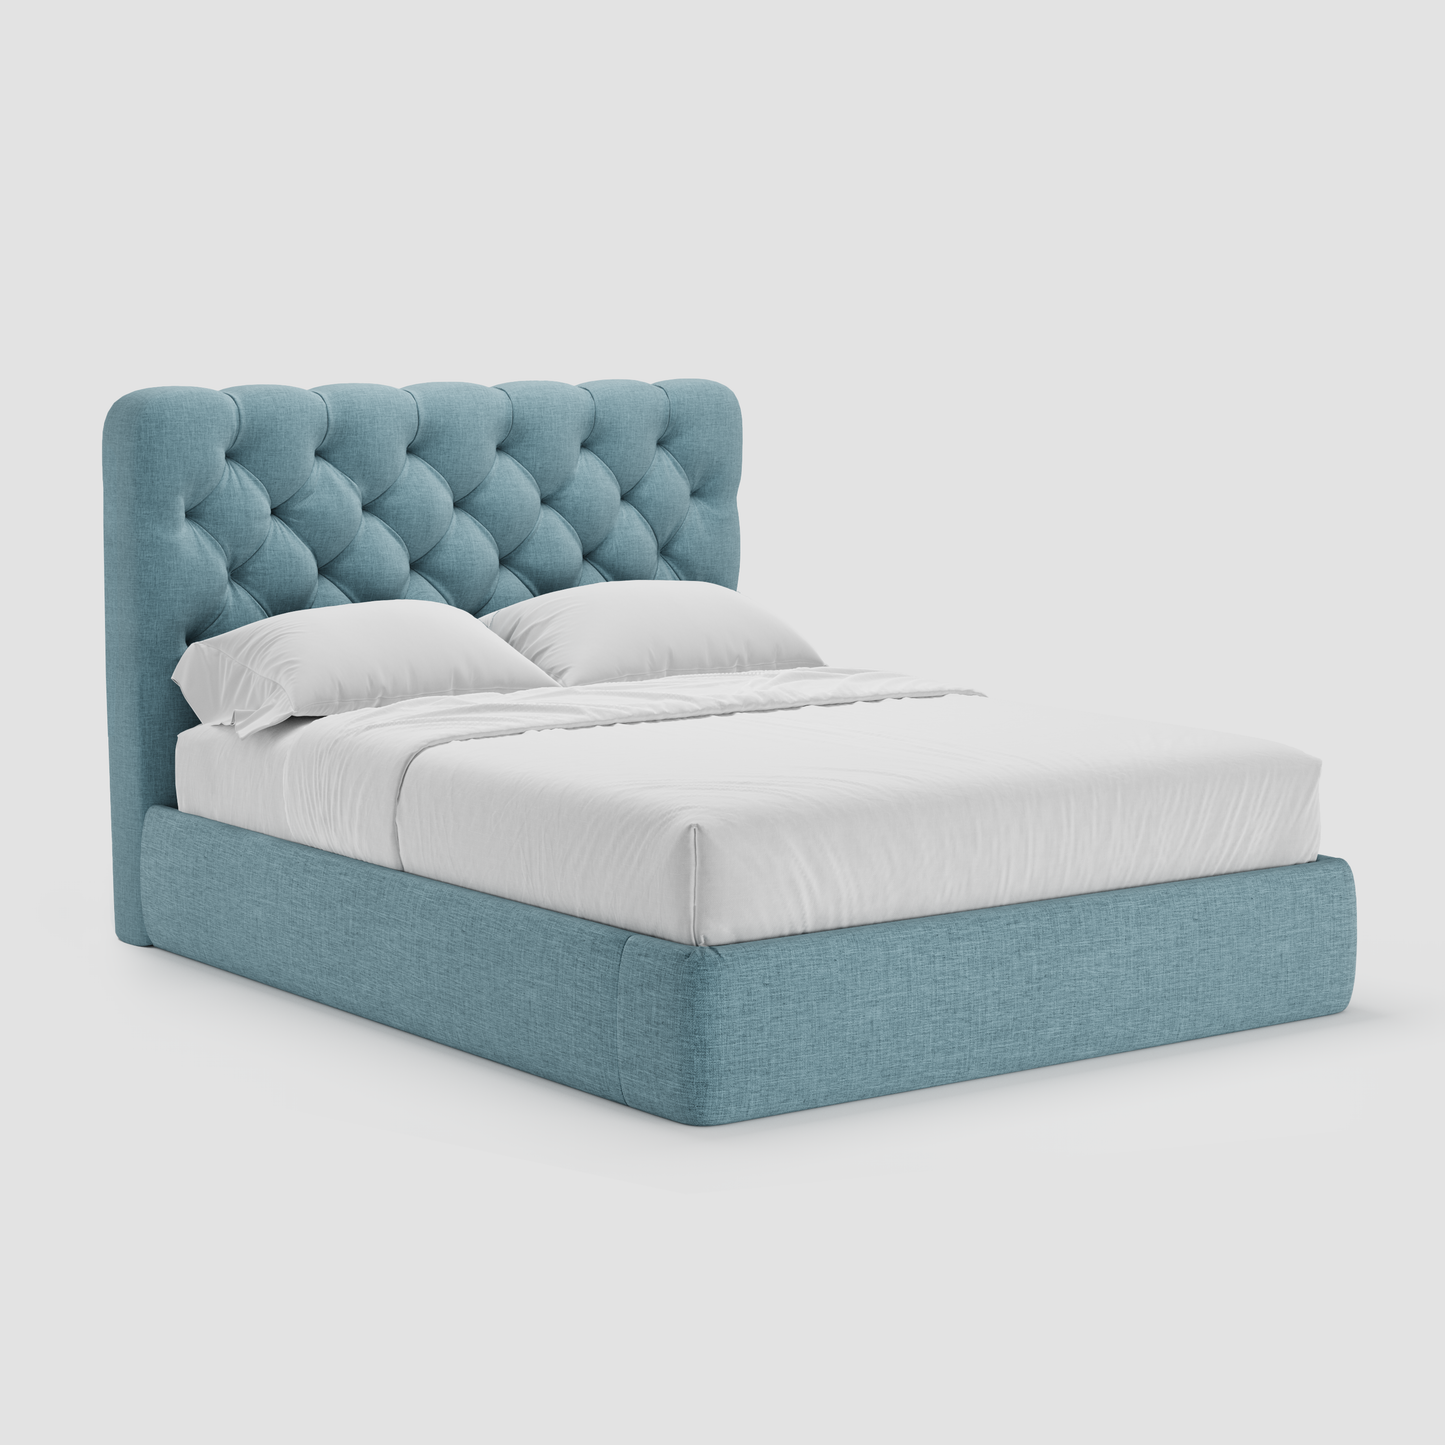 Aggy Ottoman Storage Bed - Flown the Coop